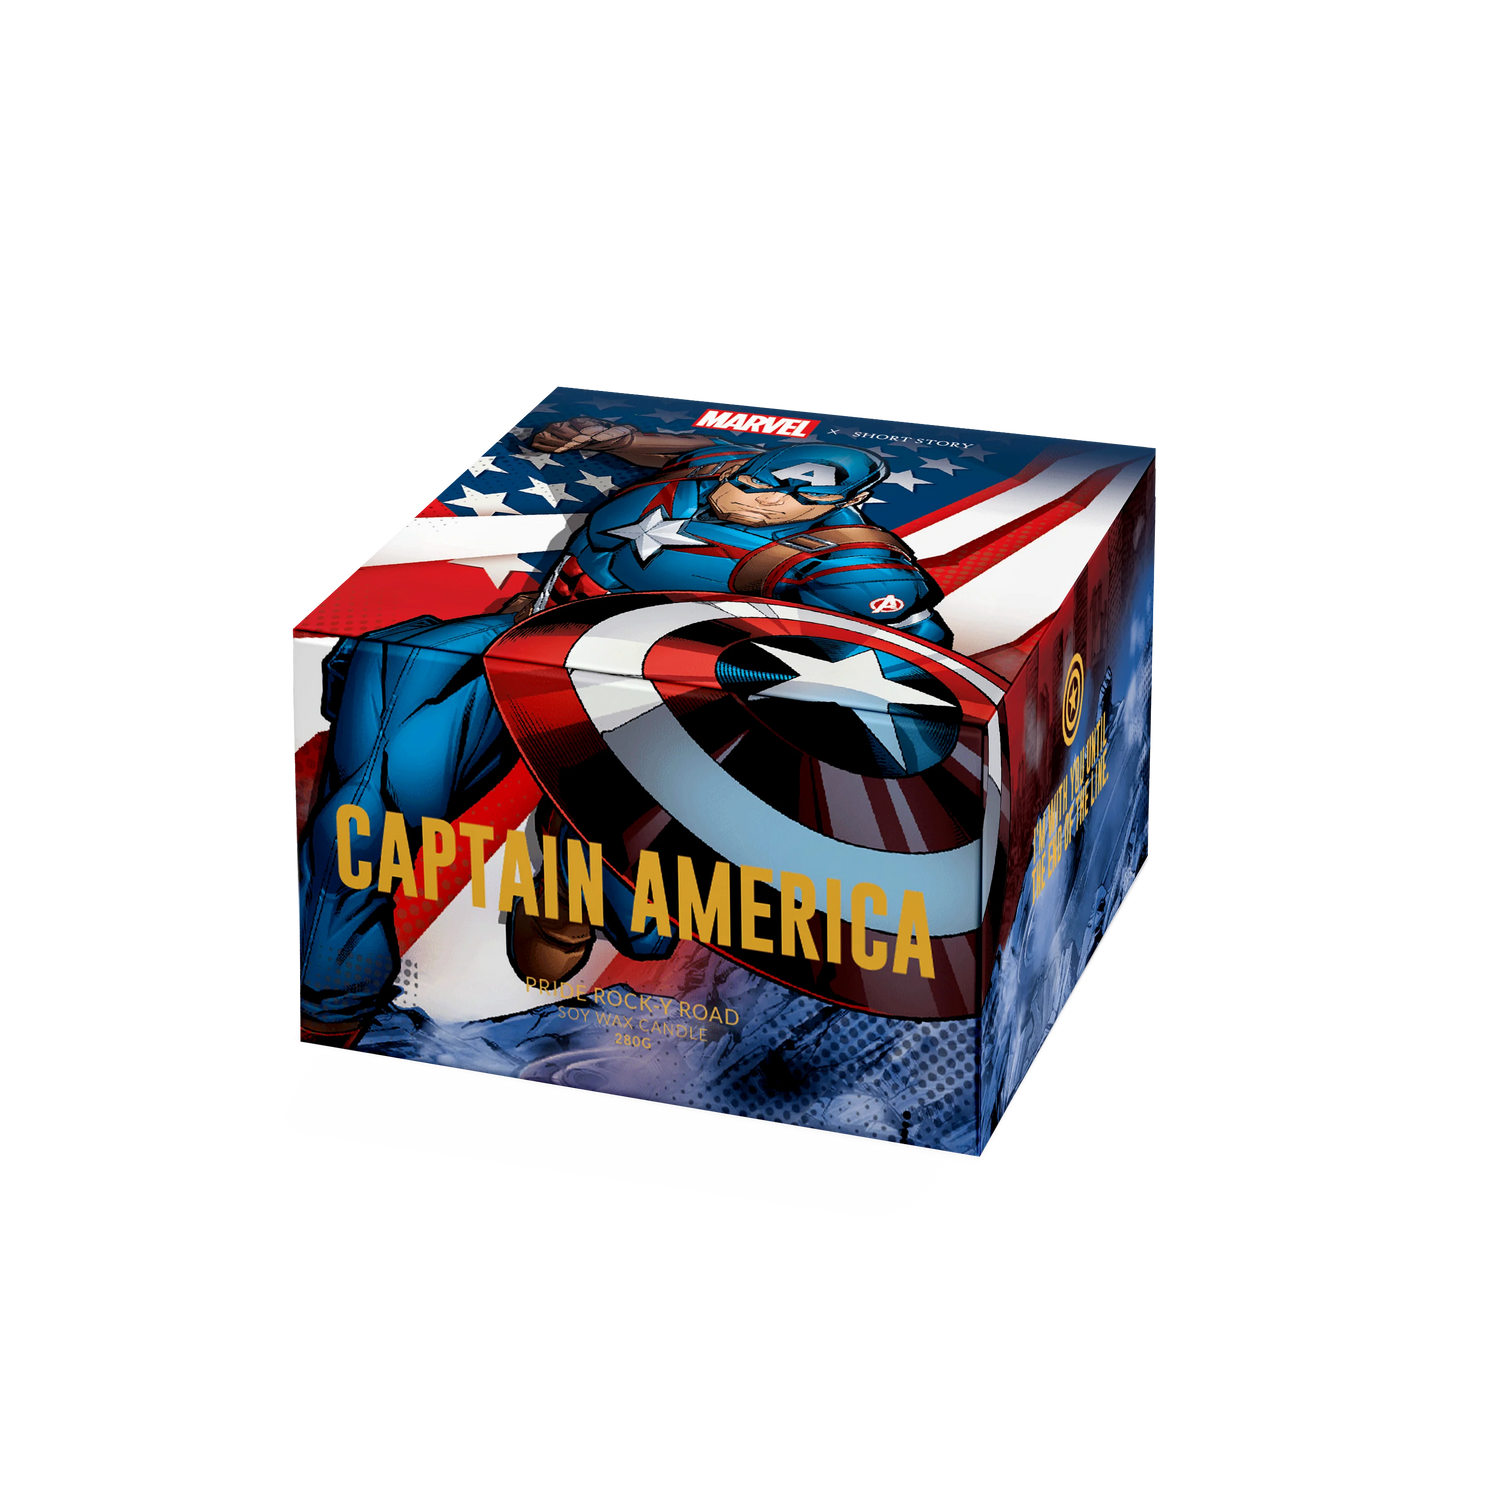 Marvel Candle Captain America